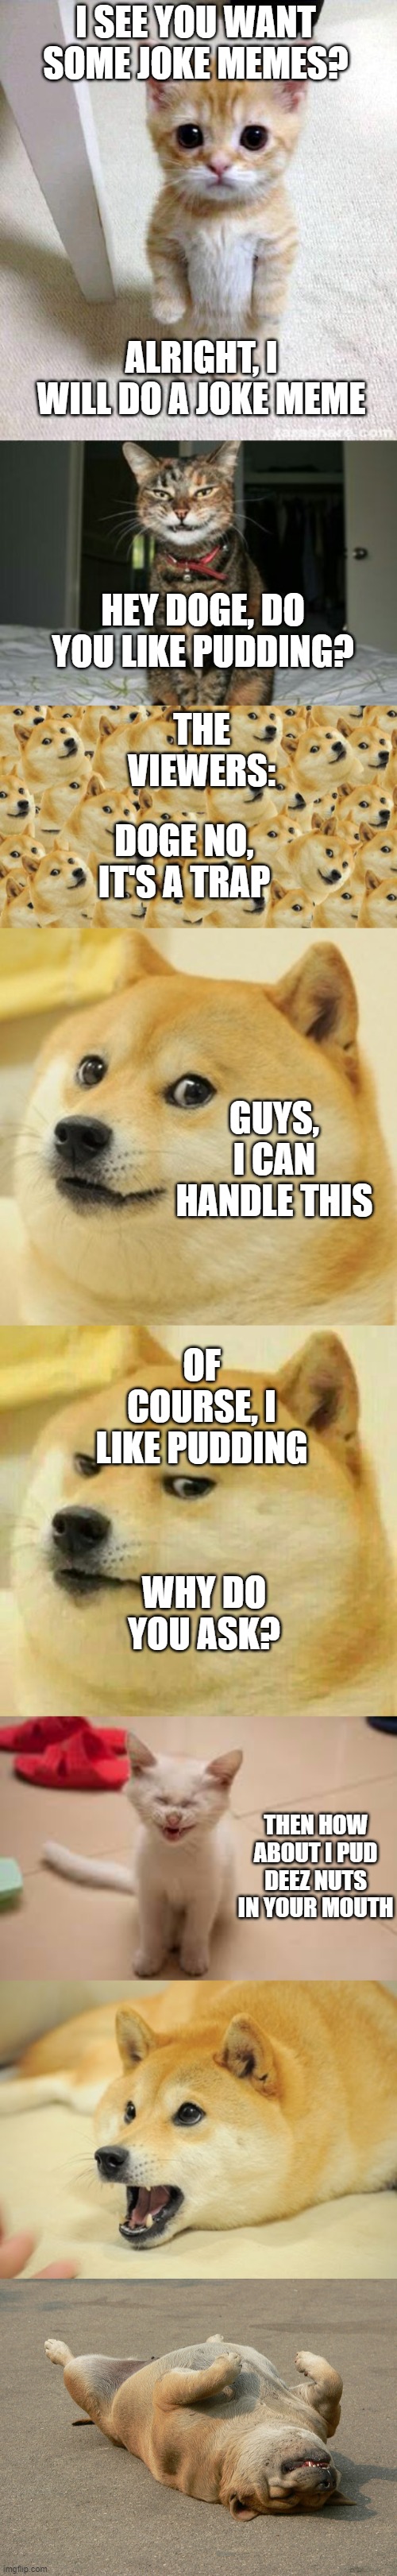 How to make a pudding joke | I SEE YOU WANT SOME JOKE MEMES? ALRIGHT, I WILL DO A JOKE MEME; HEY DOGE, DO YOU LIKE PUDDING? THE VIEWERS:; DOGE NO, IT'S A TRAP; GUYS, I CAN HANDLE THIS; OF COURSE, I LIKE PUDDING; WHY DO YOU ASK? THEN HOW ABOUT I PUD DEEZ NUTS IN YOUR MOUTH | image tagged in memes,long meme,story memes,joke memes | made w/ Imgflip meme maker